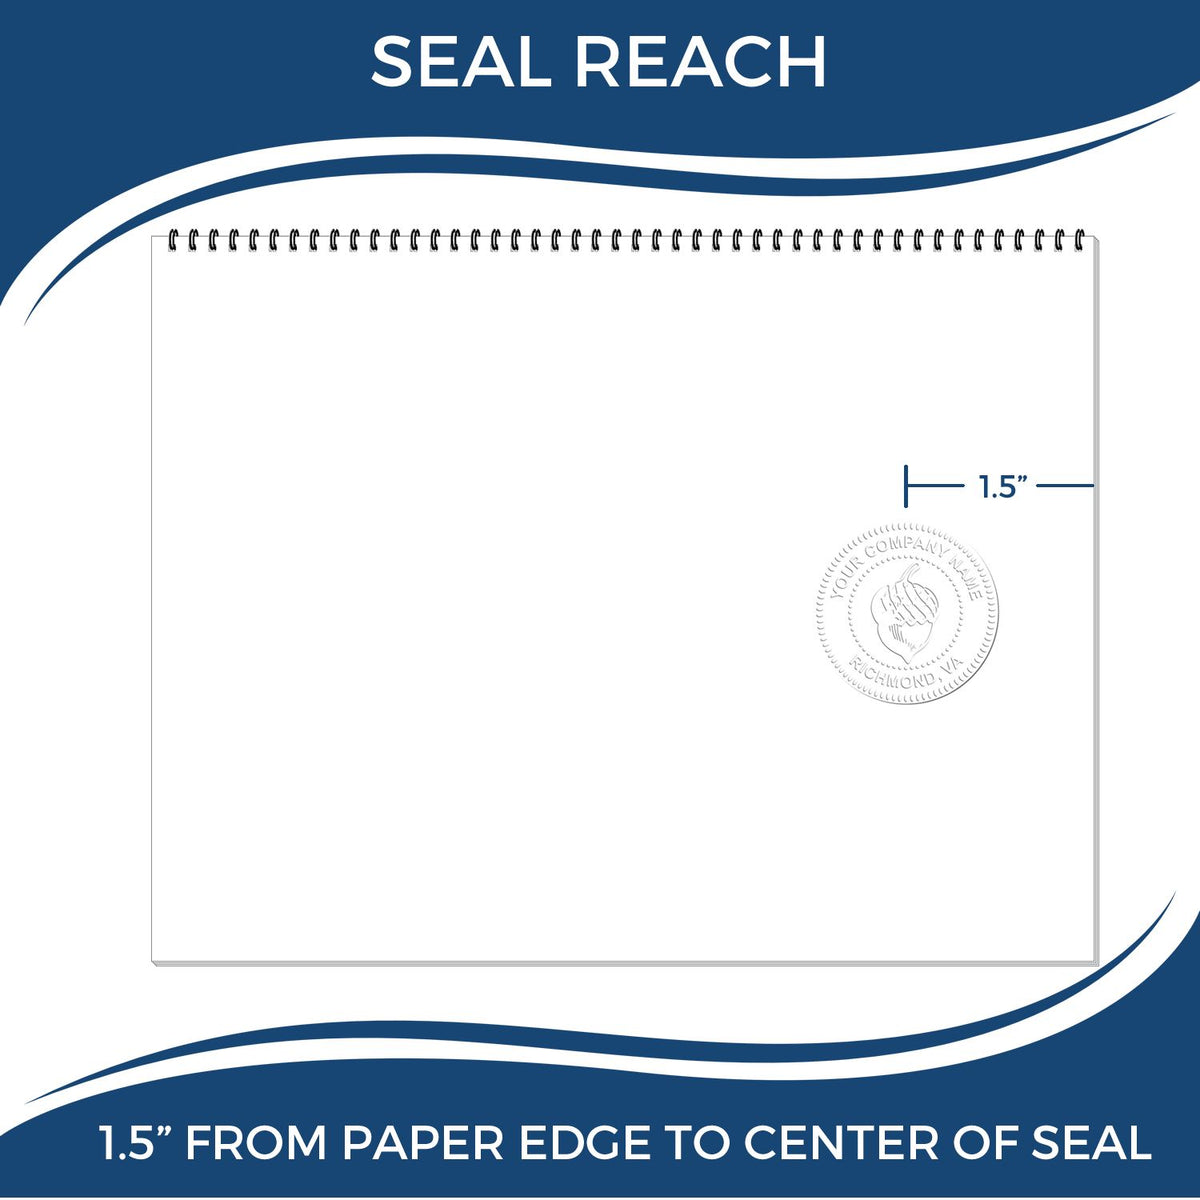 An infographic showing the seal reach which is represented by a ruler and a miniature seal image of the State of Guam Soft Land Surveyor Embossing Seal